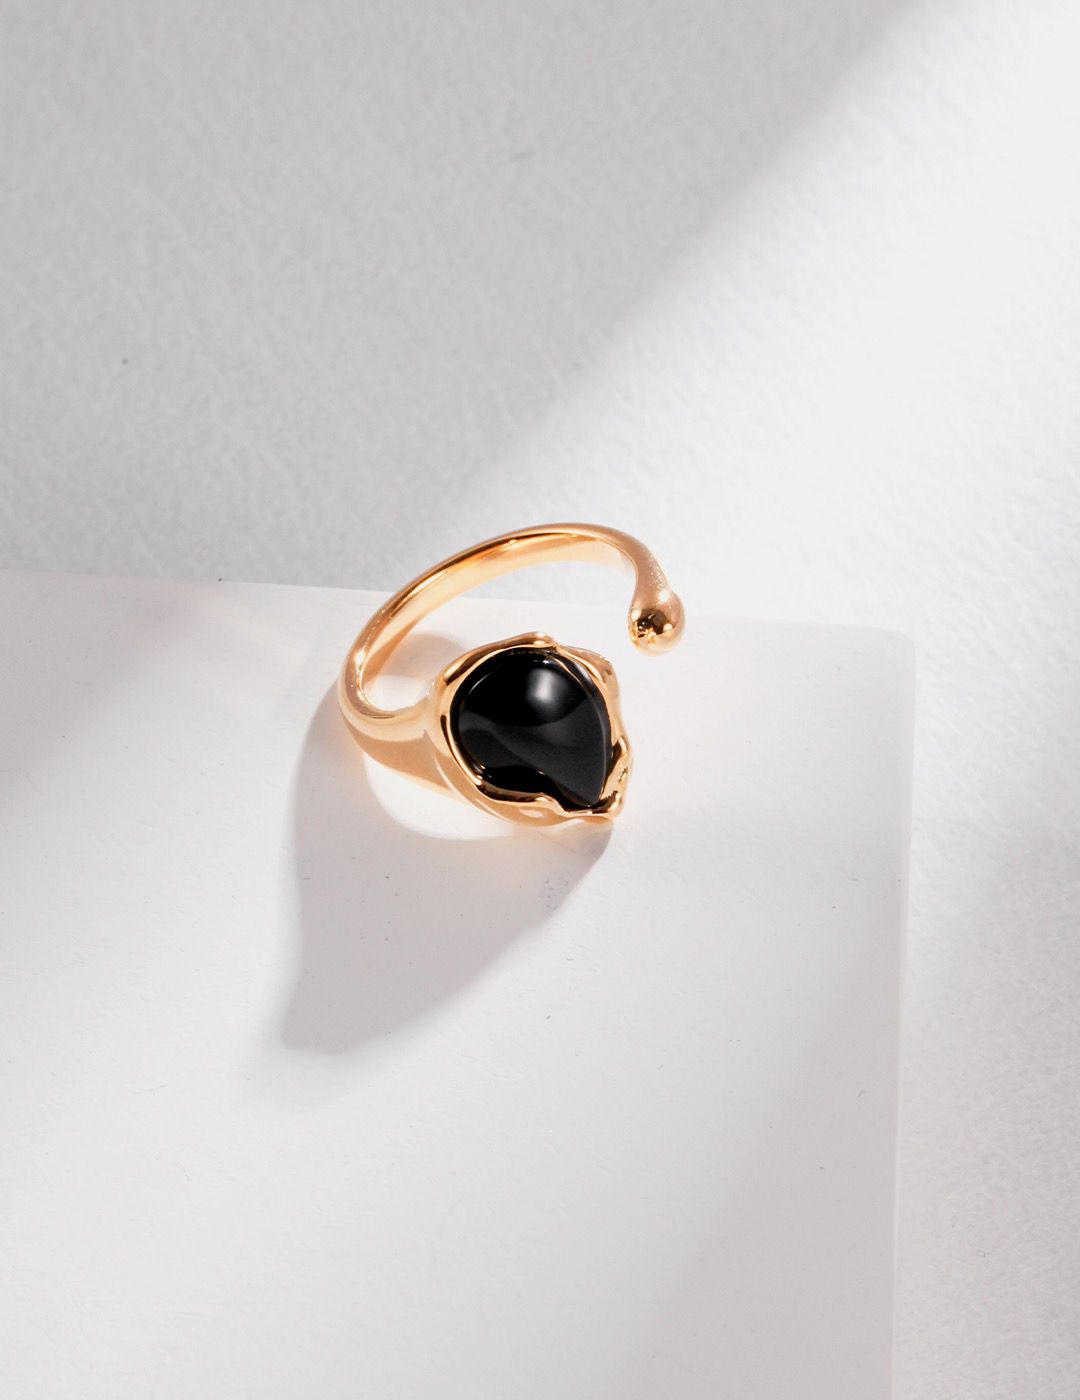 Natural Agate Statement Ring showcasing unique patterns and vibrant colors, set in a stylish silver band.